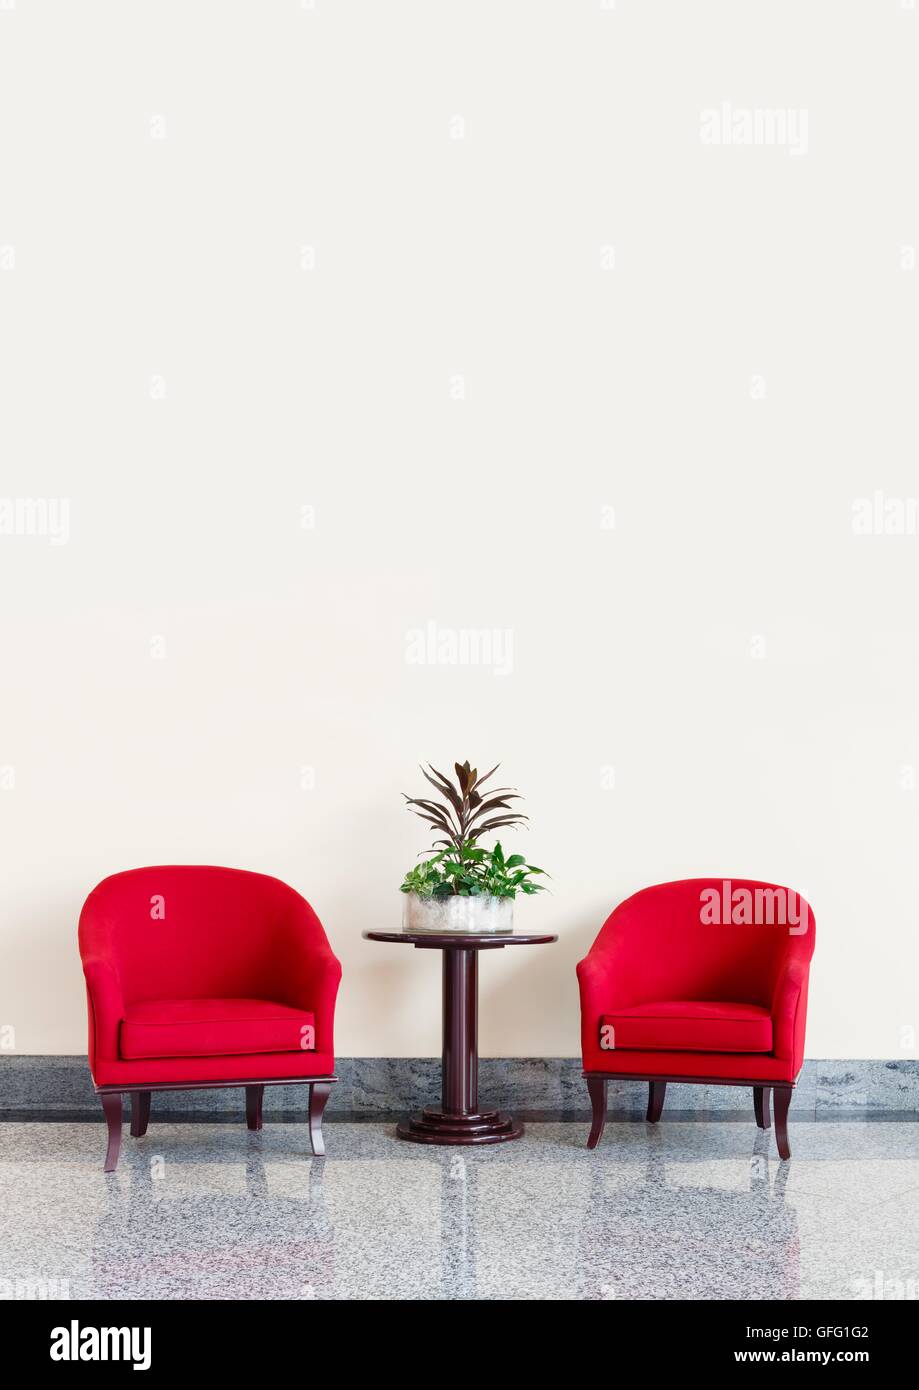 Red armchairs against a neutral wall background with copyspace Stock Photo